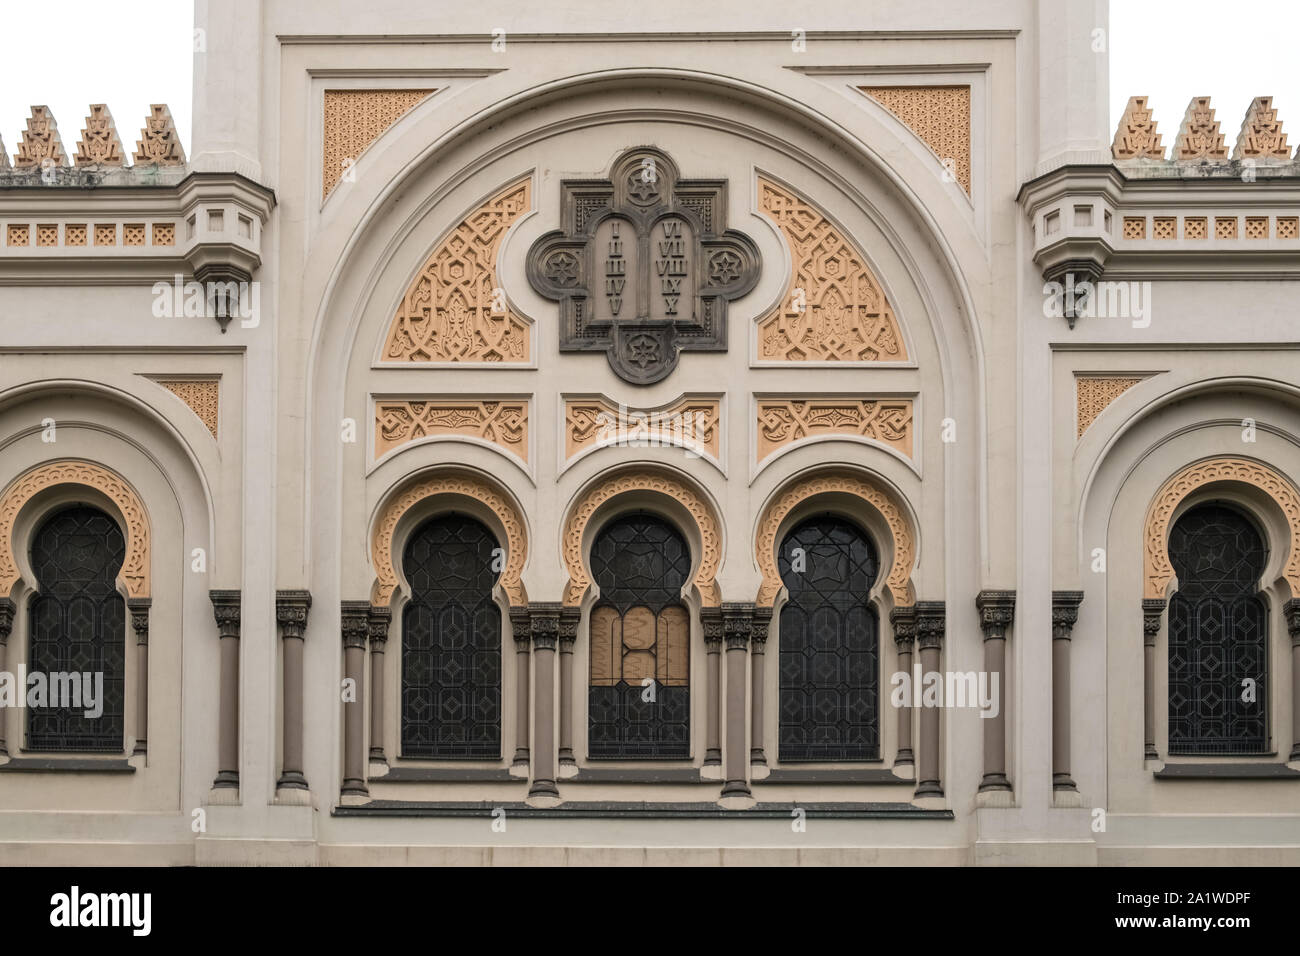 Architectural exterior of the Spanish Synagogue, built in a Moorish Revivalist style, and now operating as a museum, Old Town, Prague, Czech Republic. Stock Photo